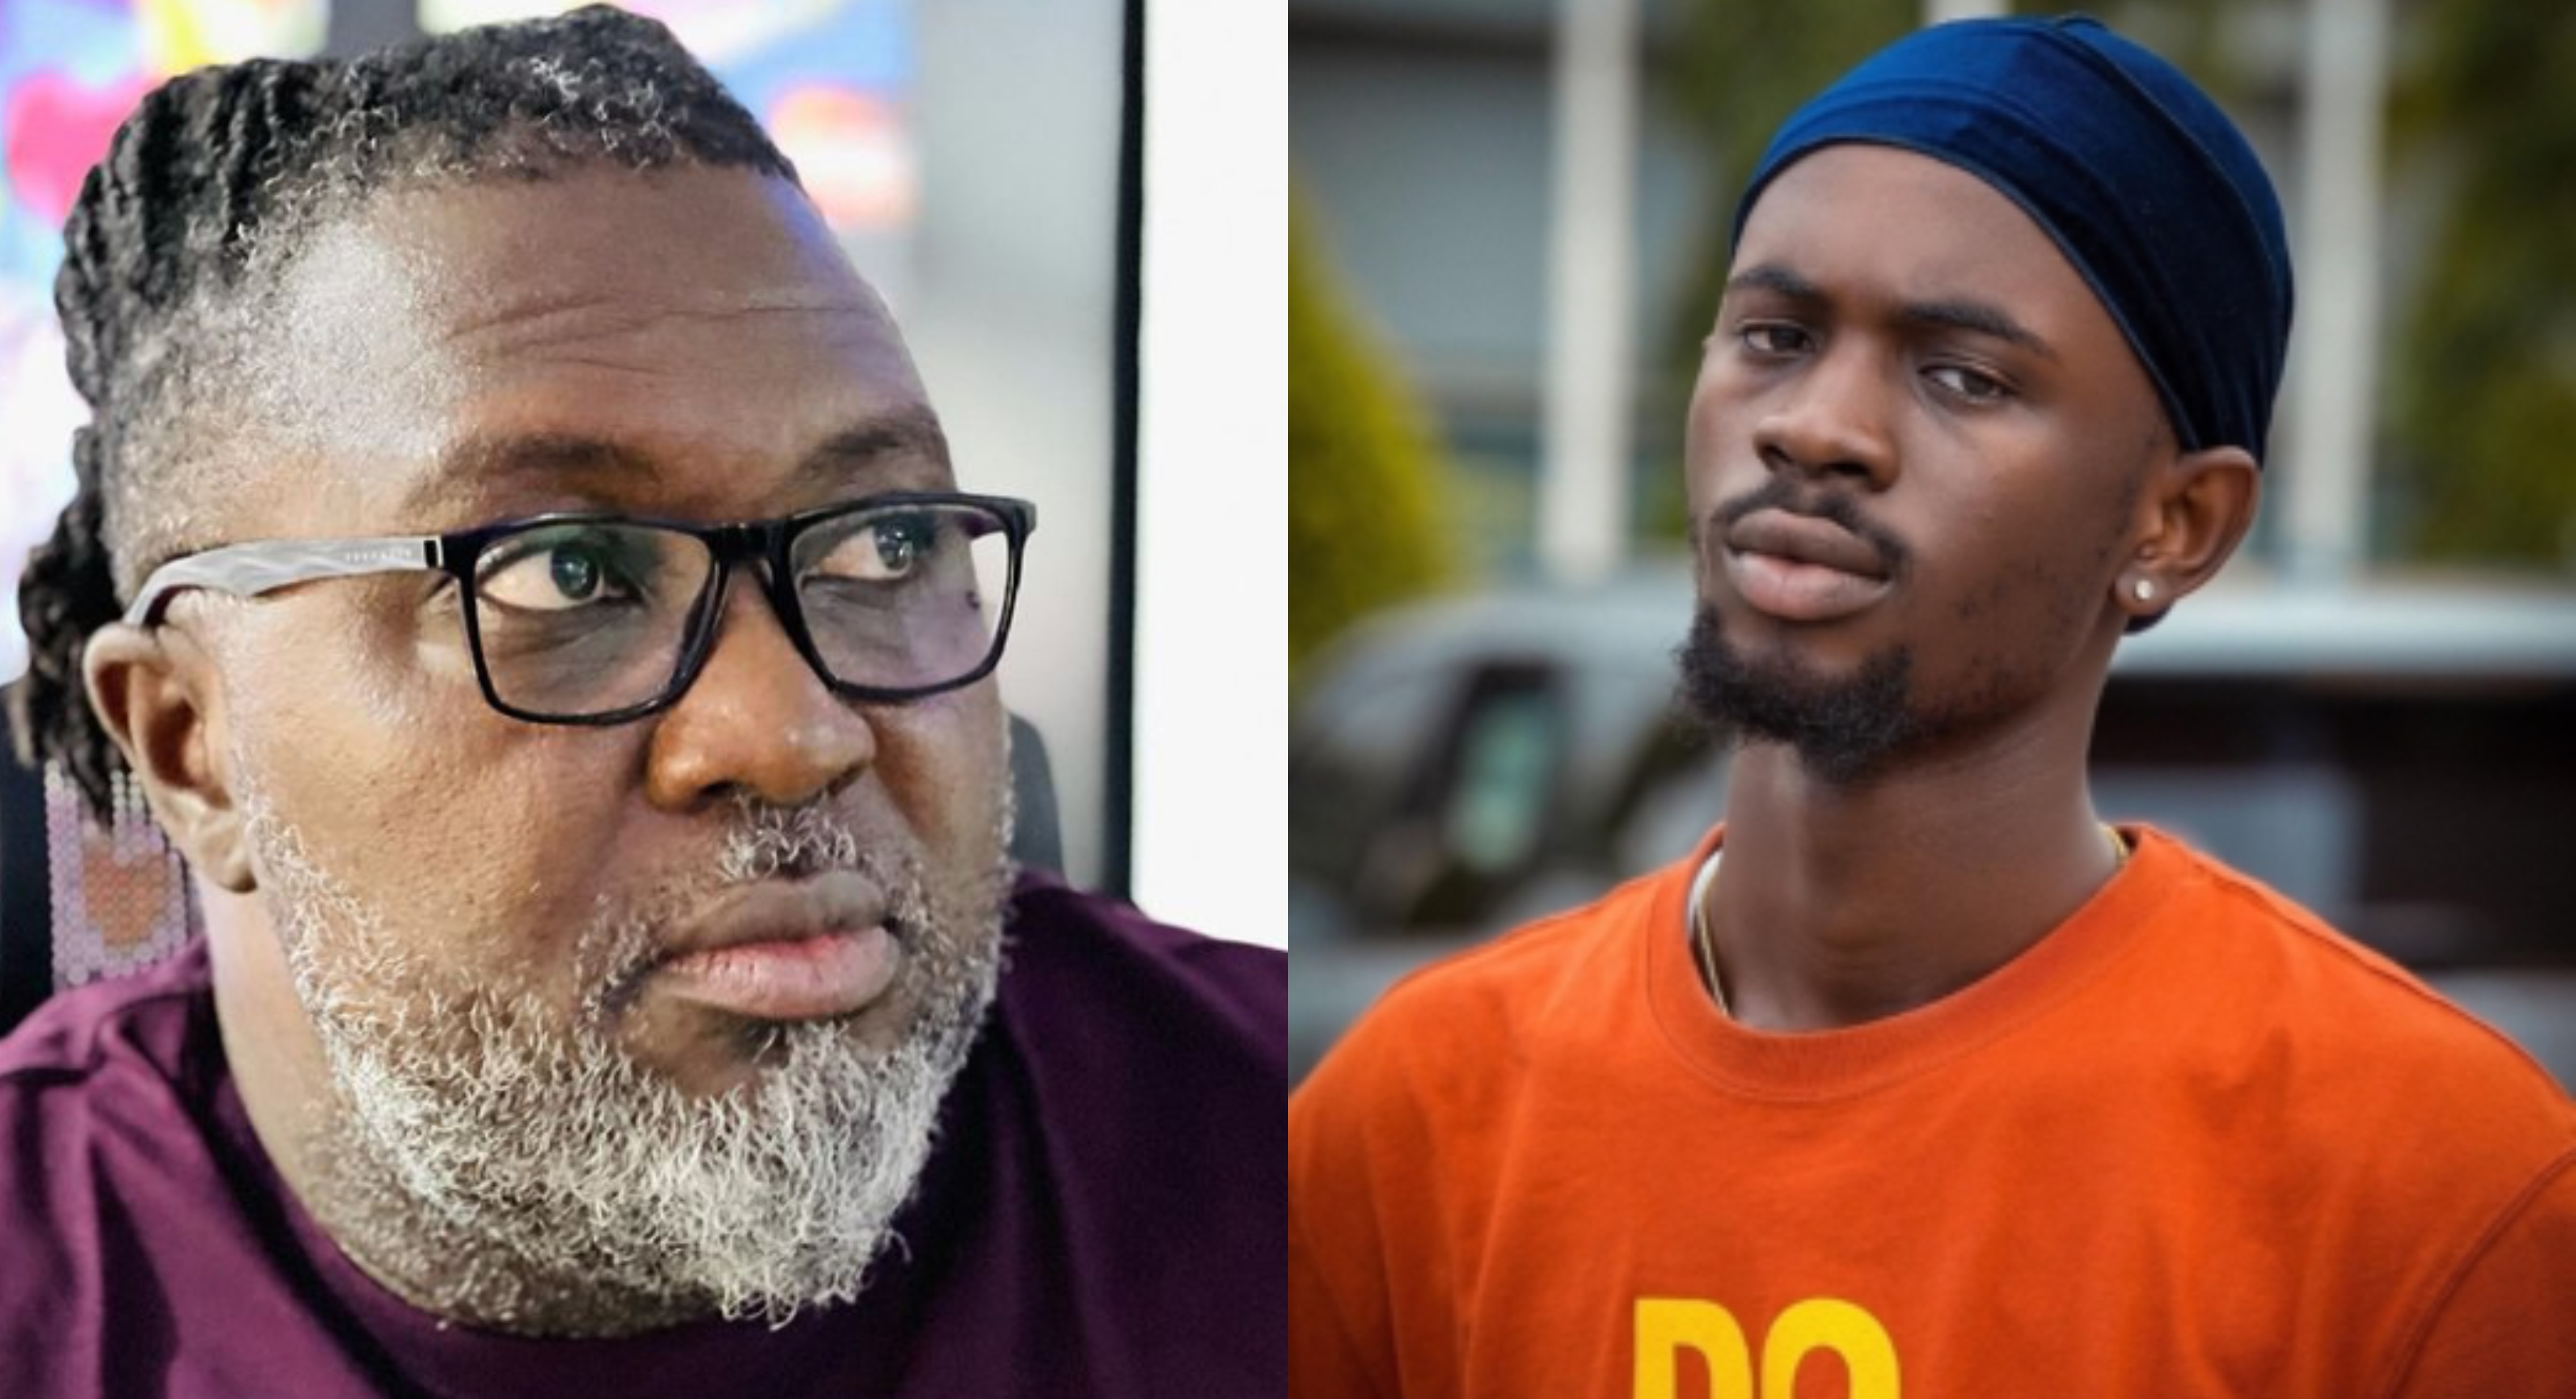 Deal with this issue or it will come back to haunt you – Hammer to Black Sherif